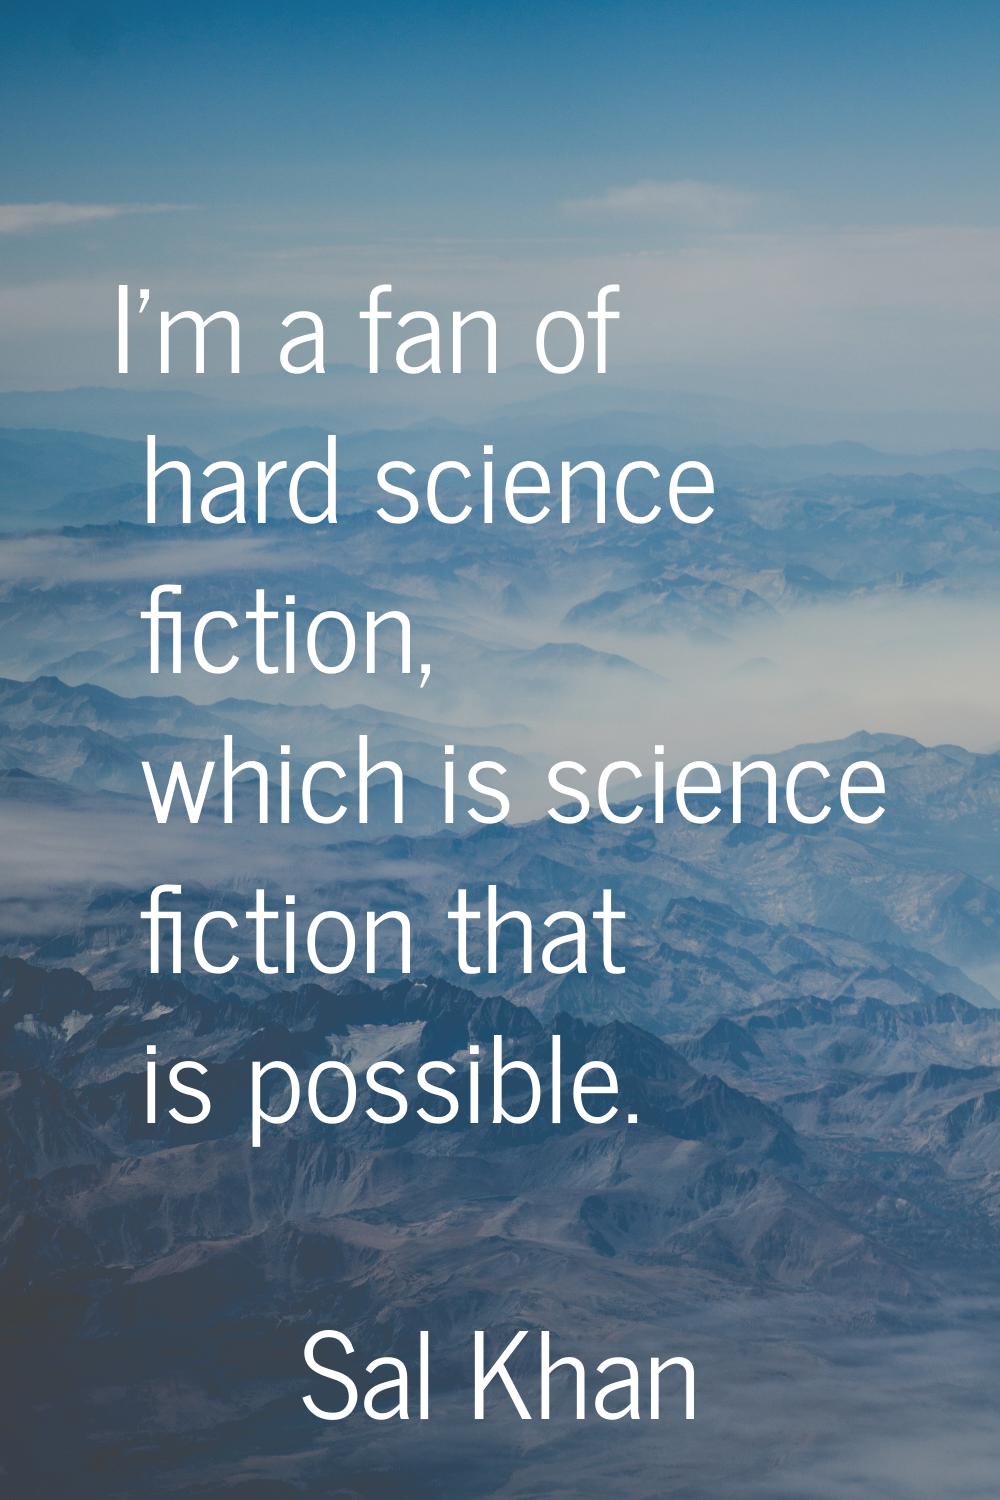 I'm a fan of hard science fiction, which is science fiction that is possible.